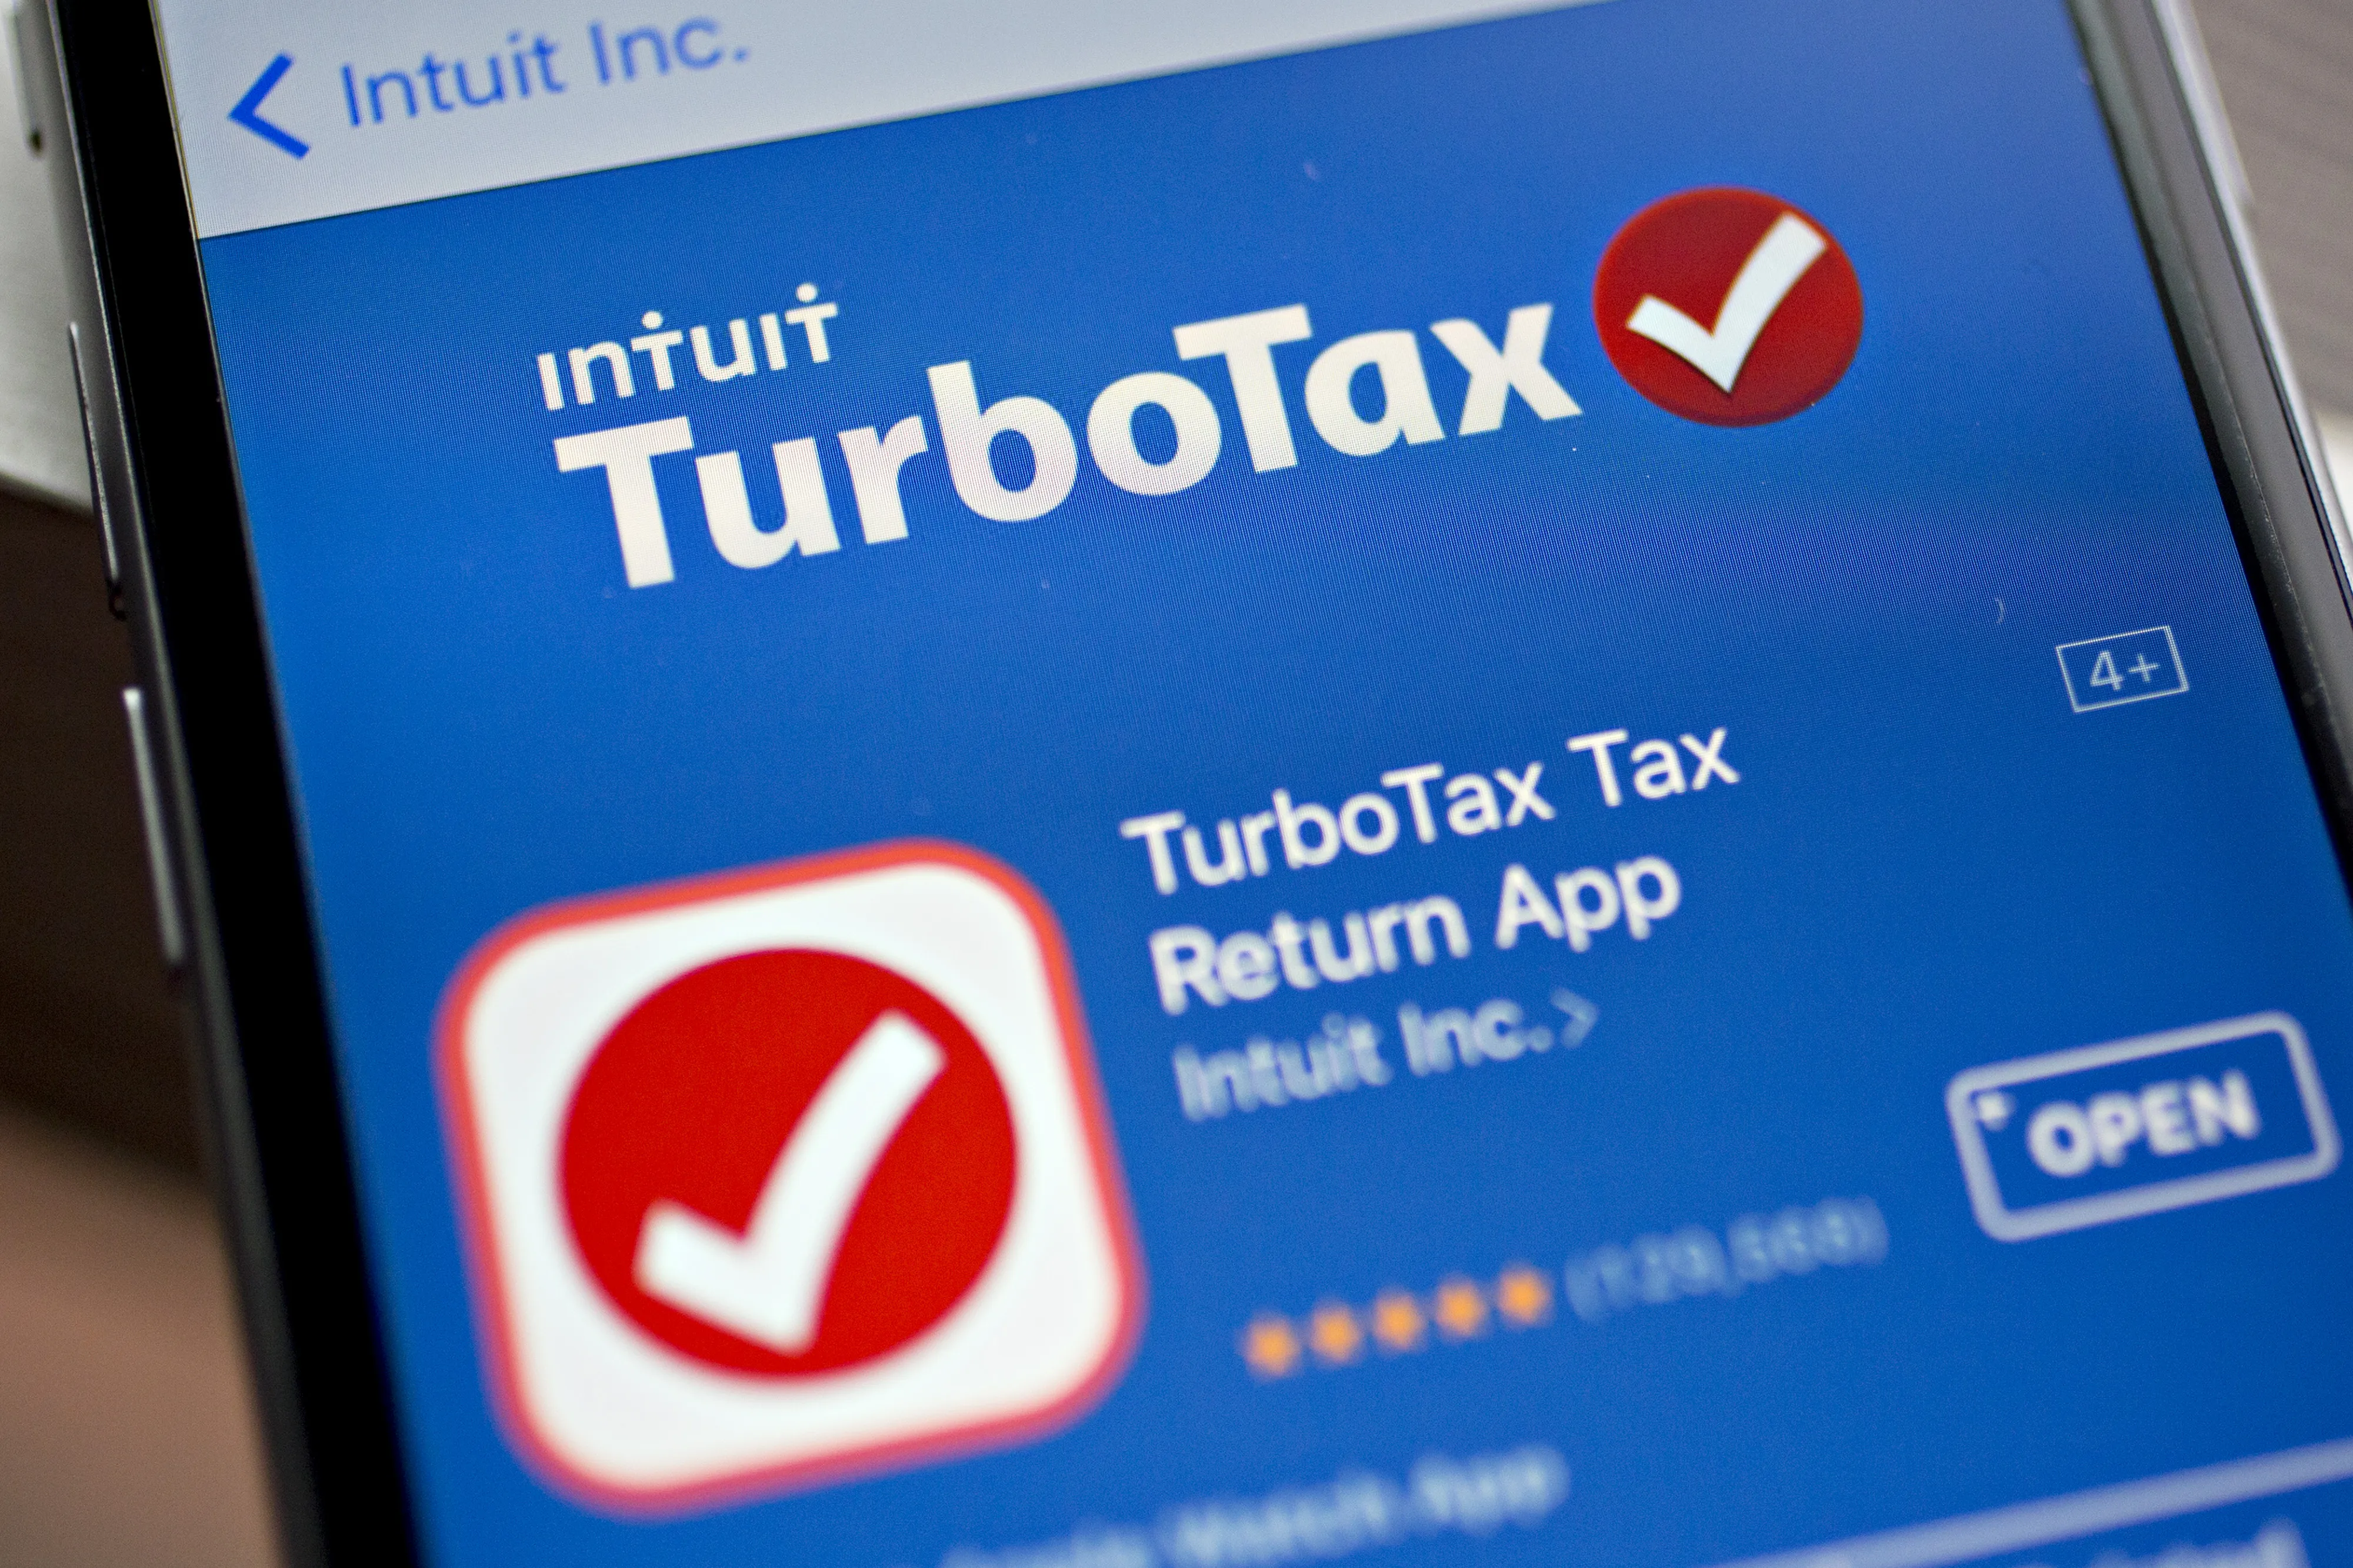 turbotax 2015 home and business update torrent